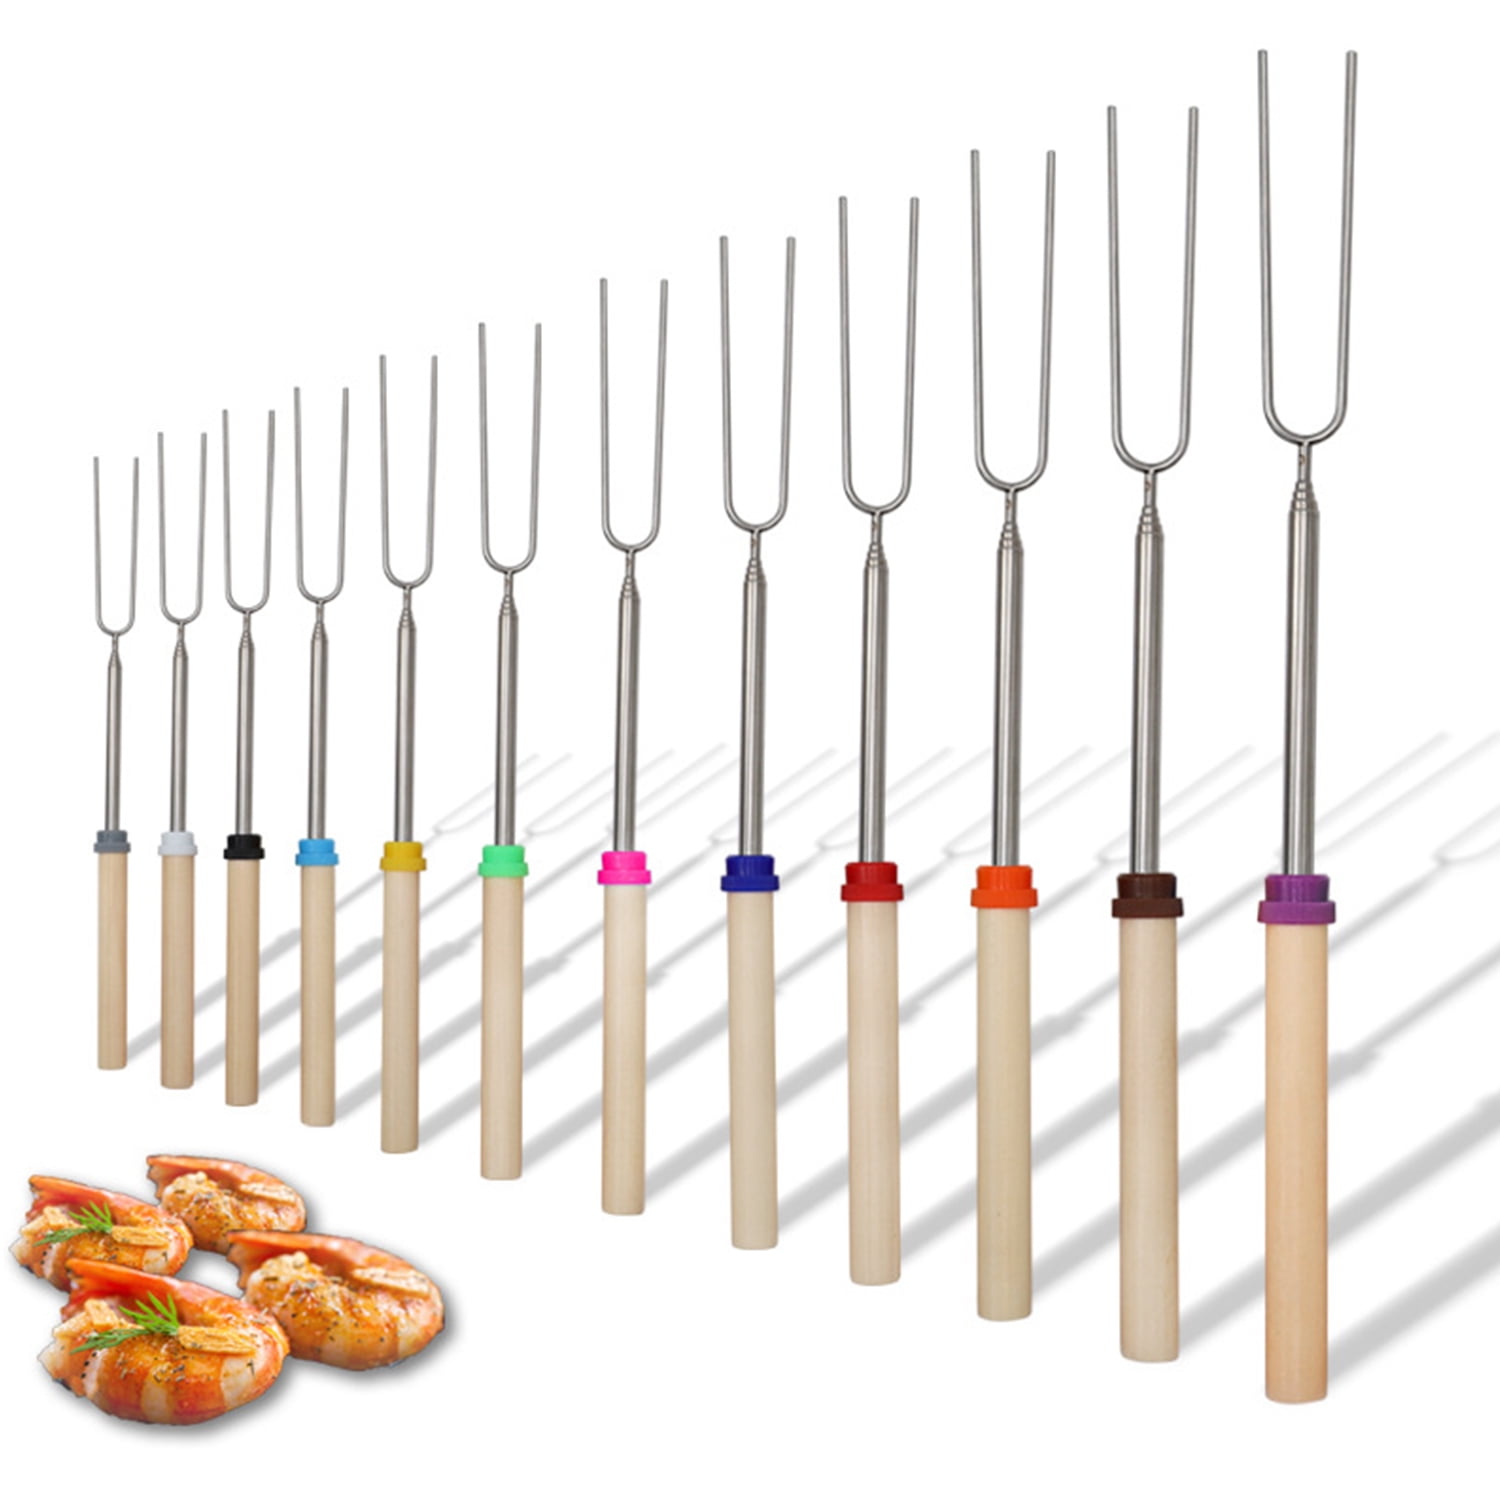 8pcs, As Shown NYGSTORE Stainless Steel BBQ Marshmallow Roasting Sticks Extending Roaster Telescoping for Hot Dog Campfire Camping Stove BBQ Tools 